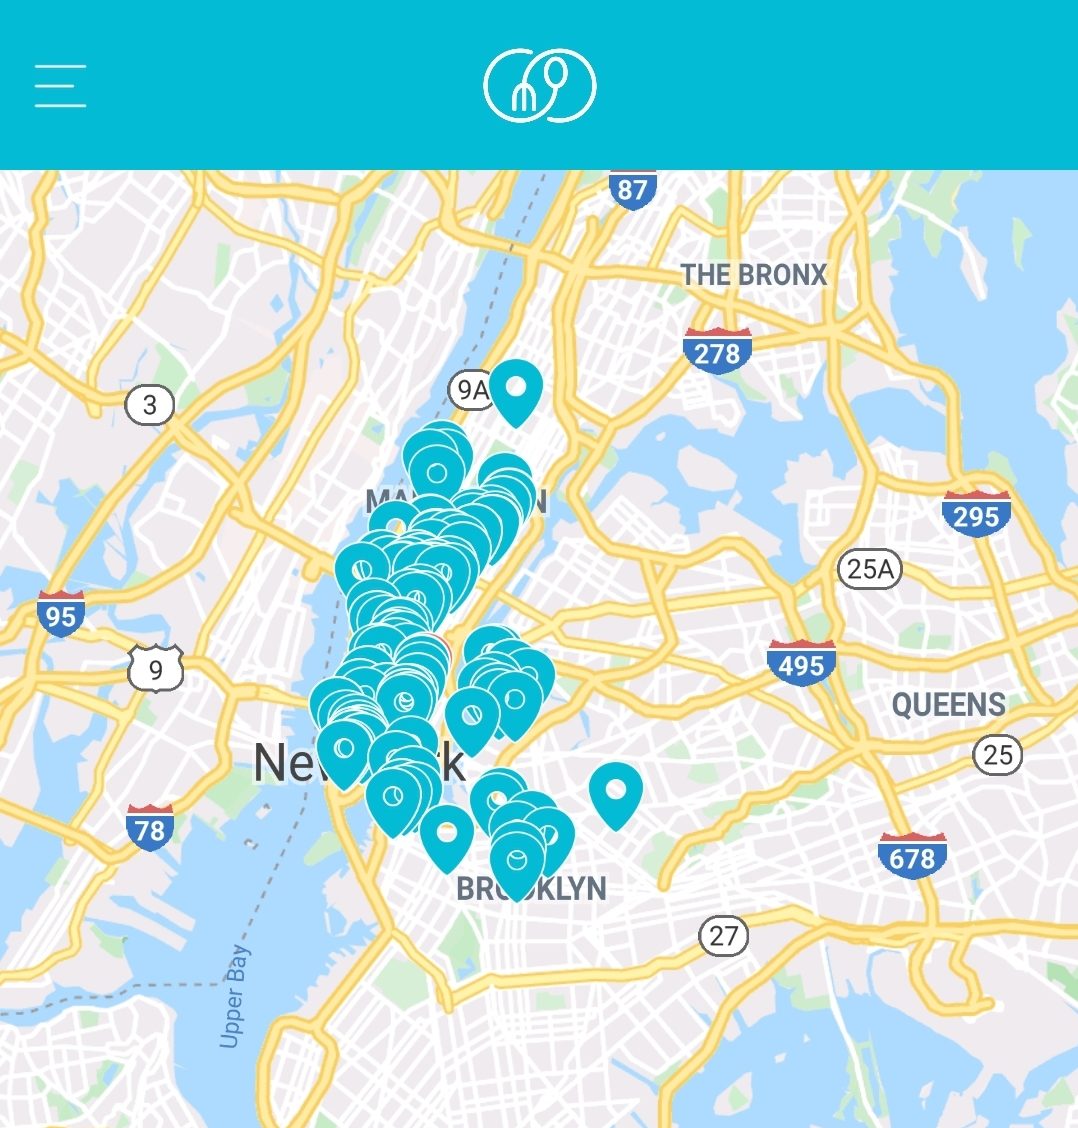 Food for All NYC locations